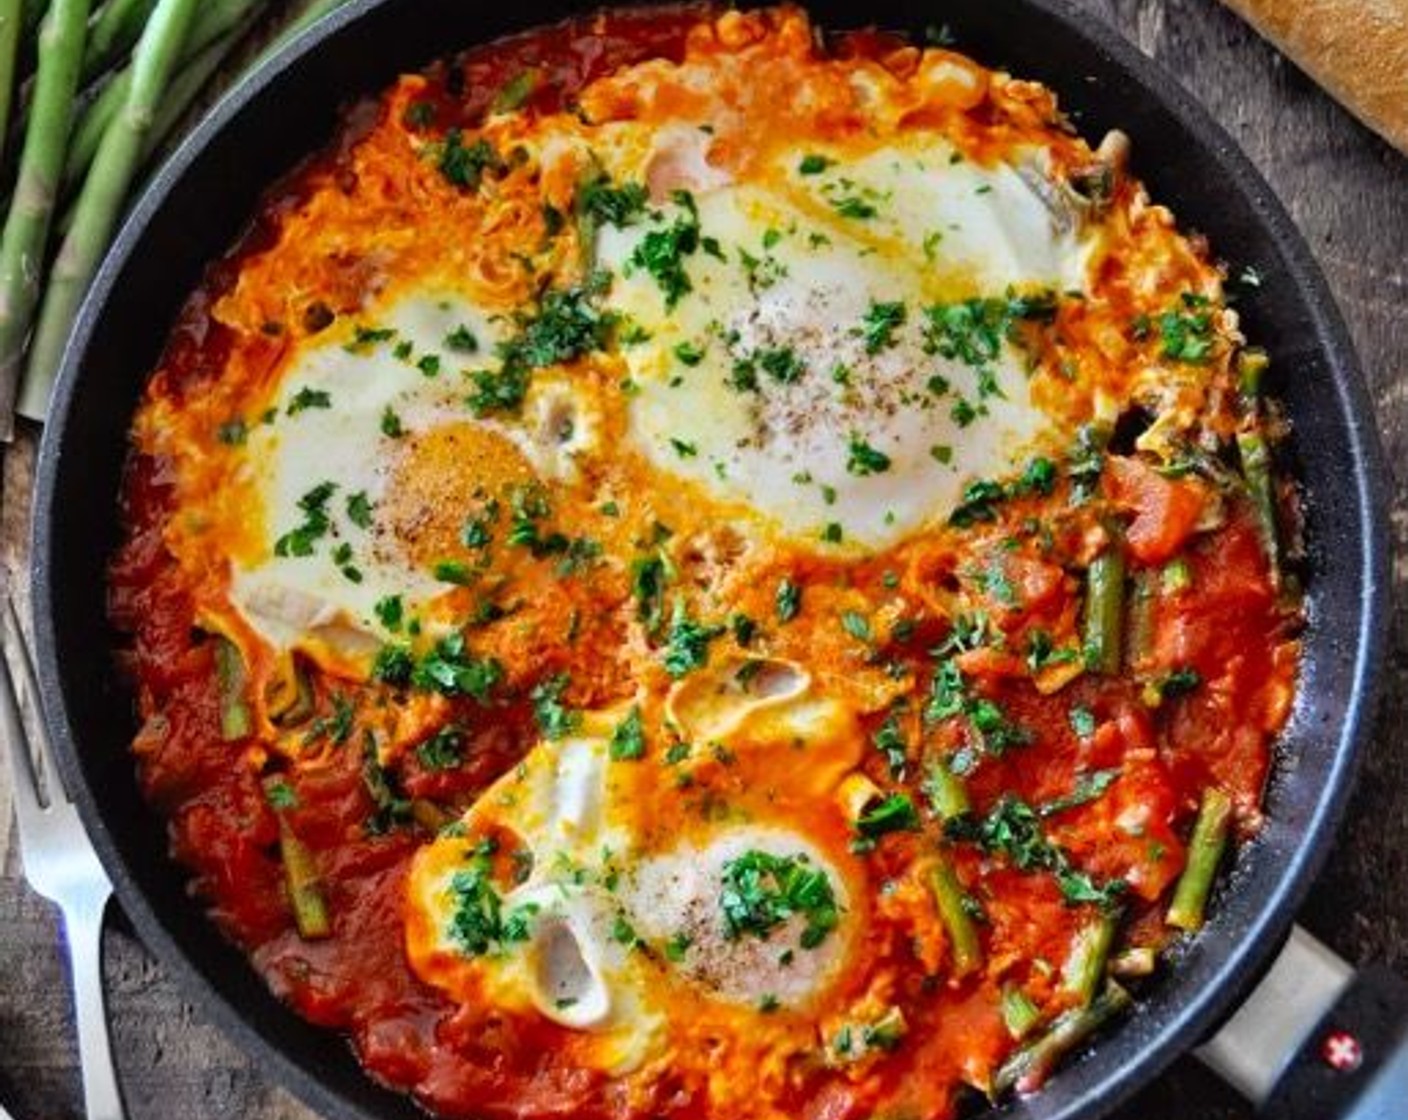 Spanish Eggs with Tomatoes and Asparagus